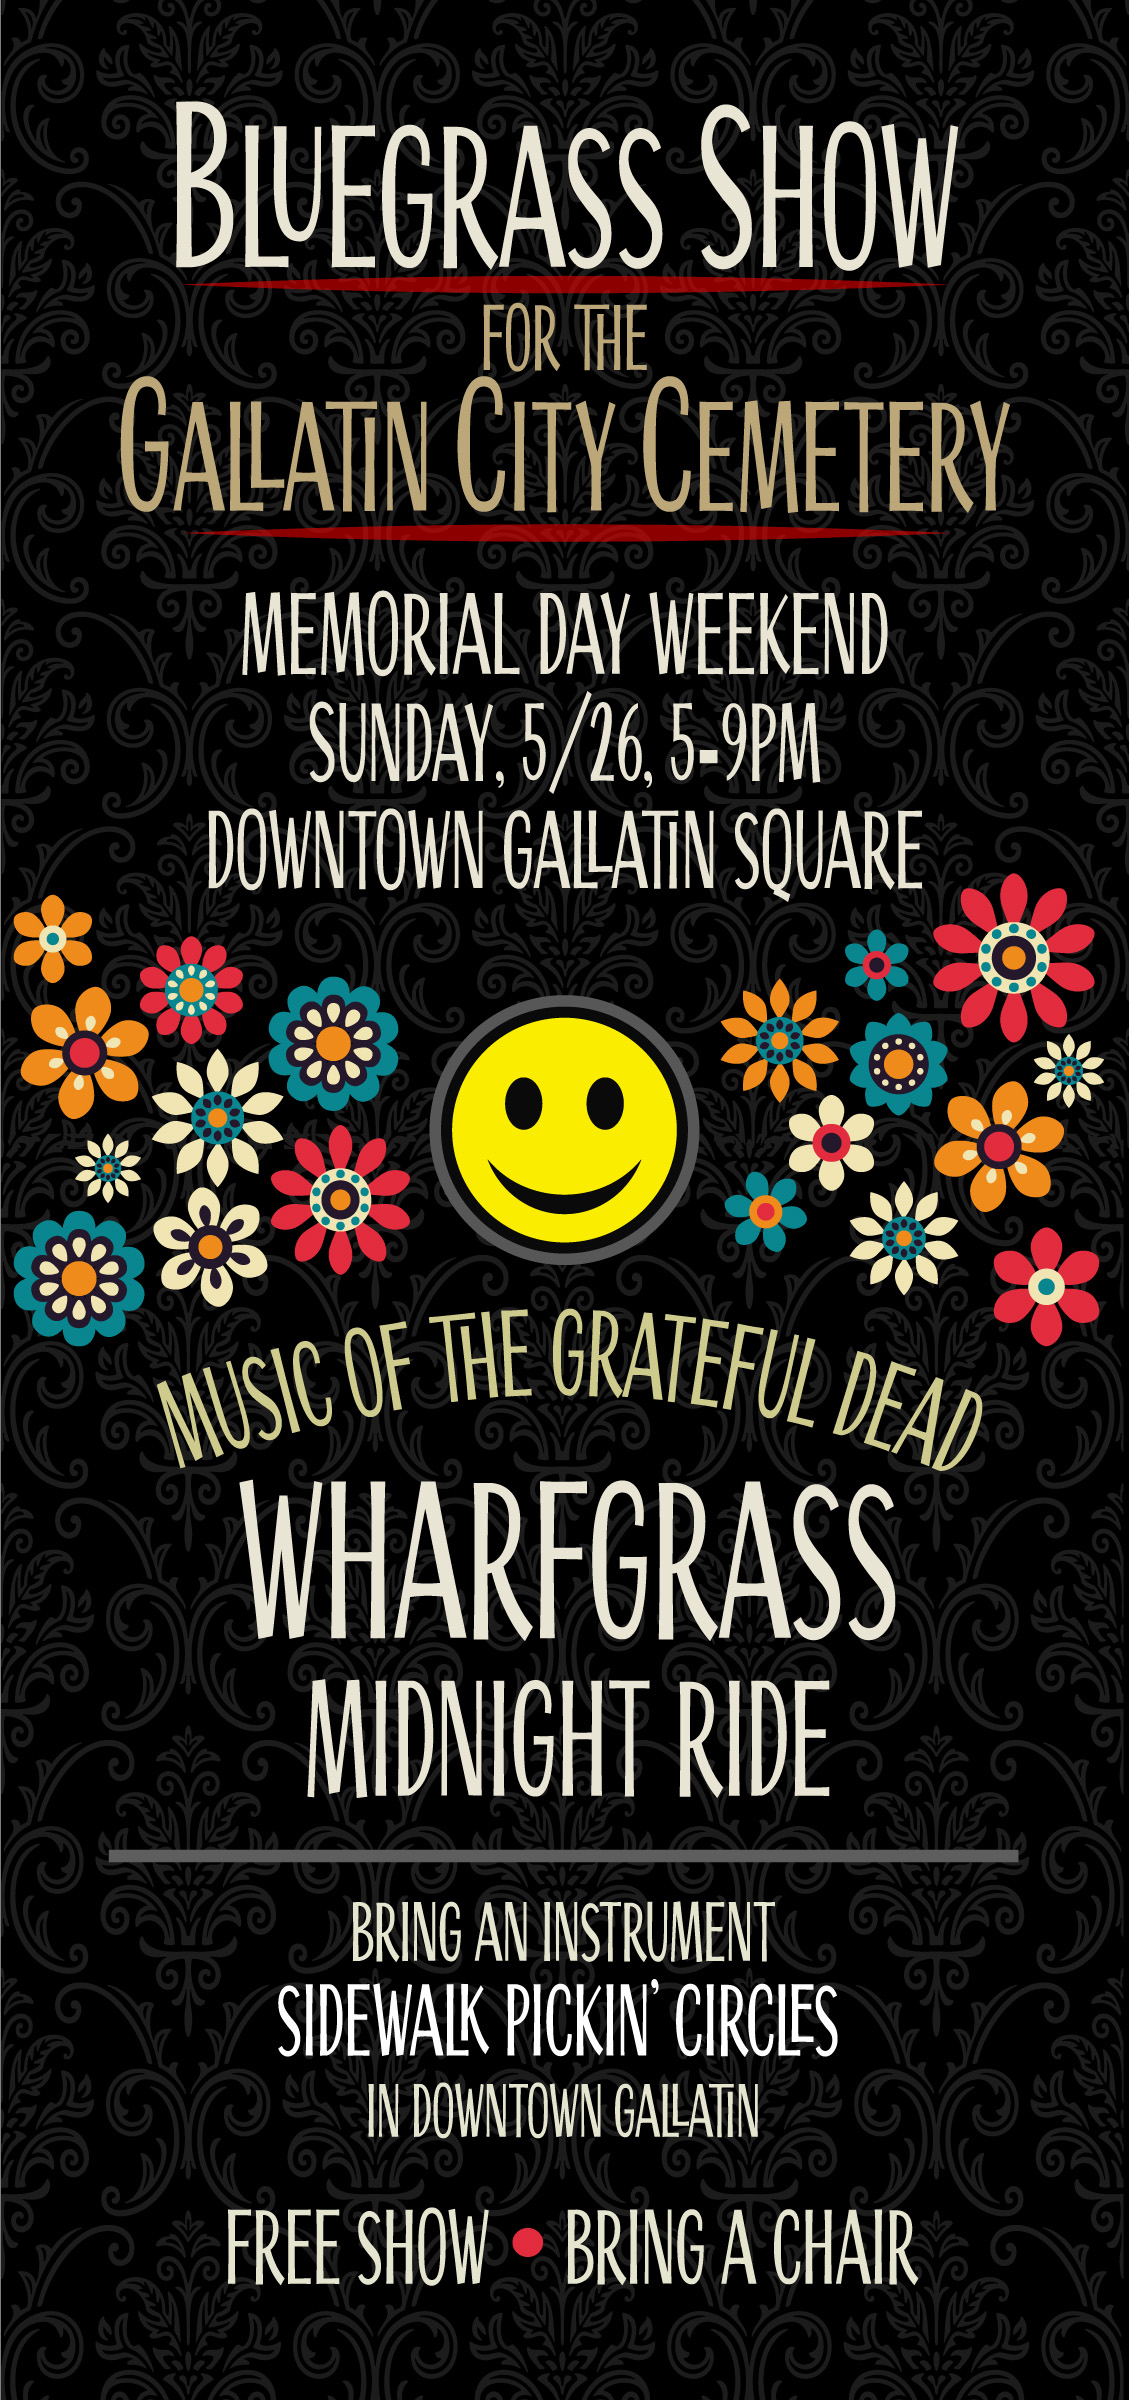 Gallatin's Memorial Day event to move bluegrass Grateful Dead show from cemetery after pushback